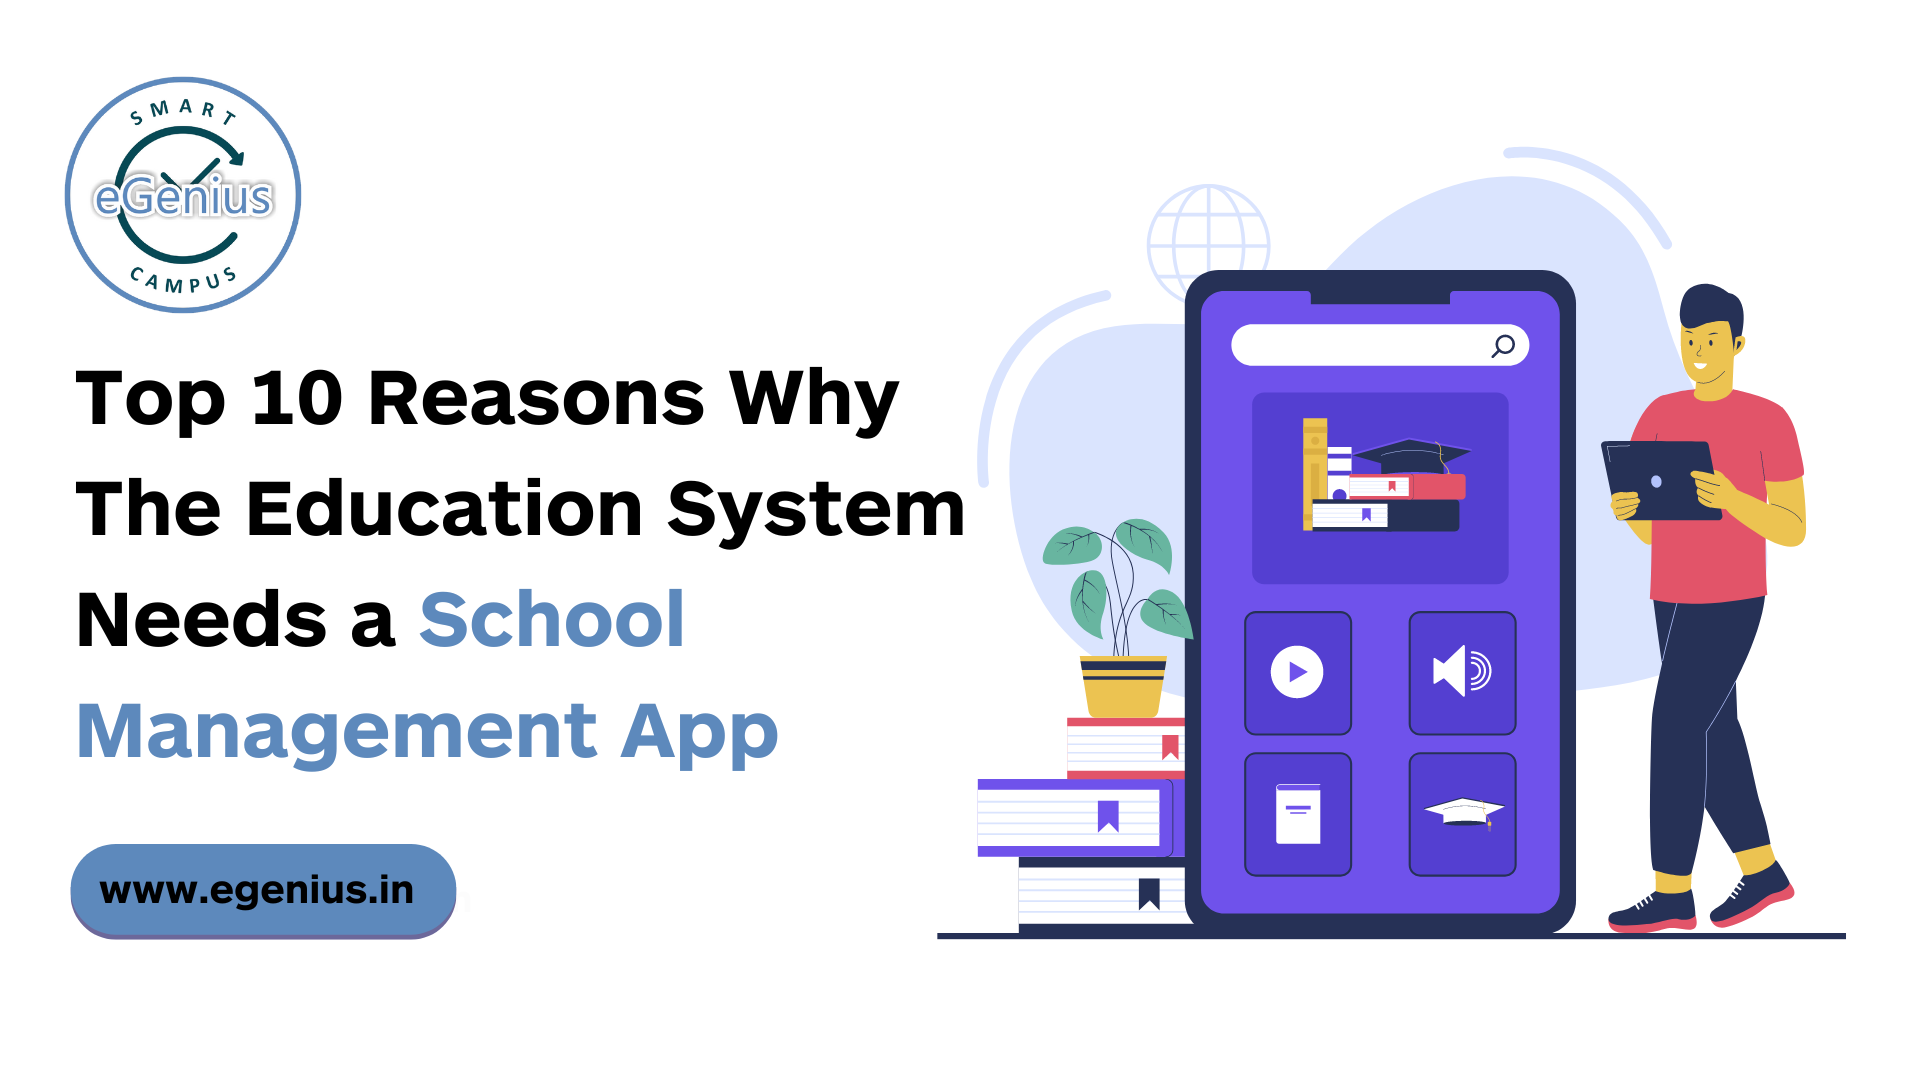 Top 10 Reasons Why the Education System Needs a School Management App